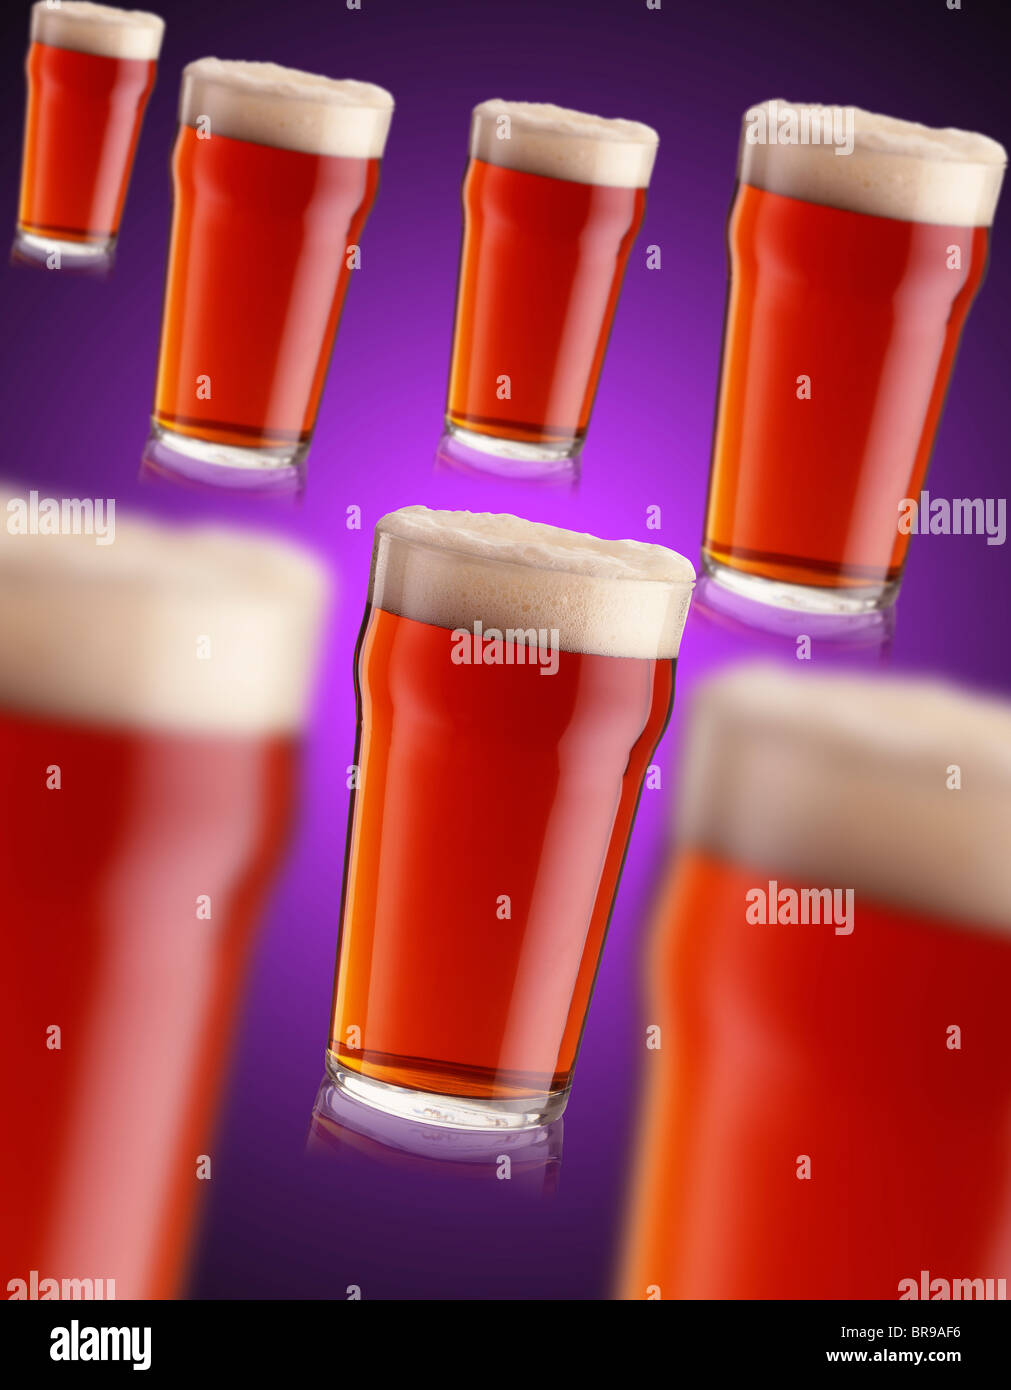 7 pints of bitter real ale on a purple background Stock Photo